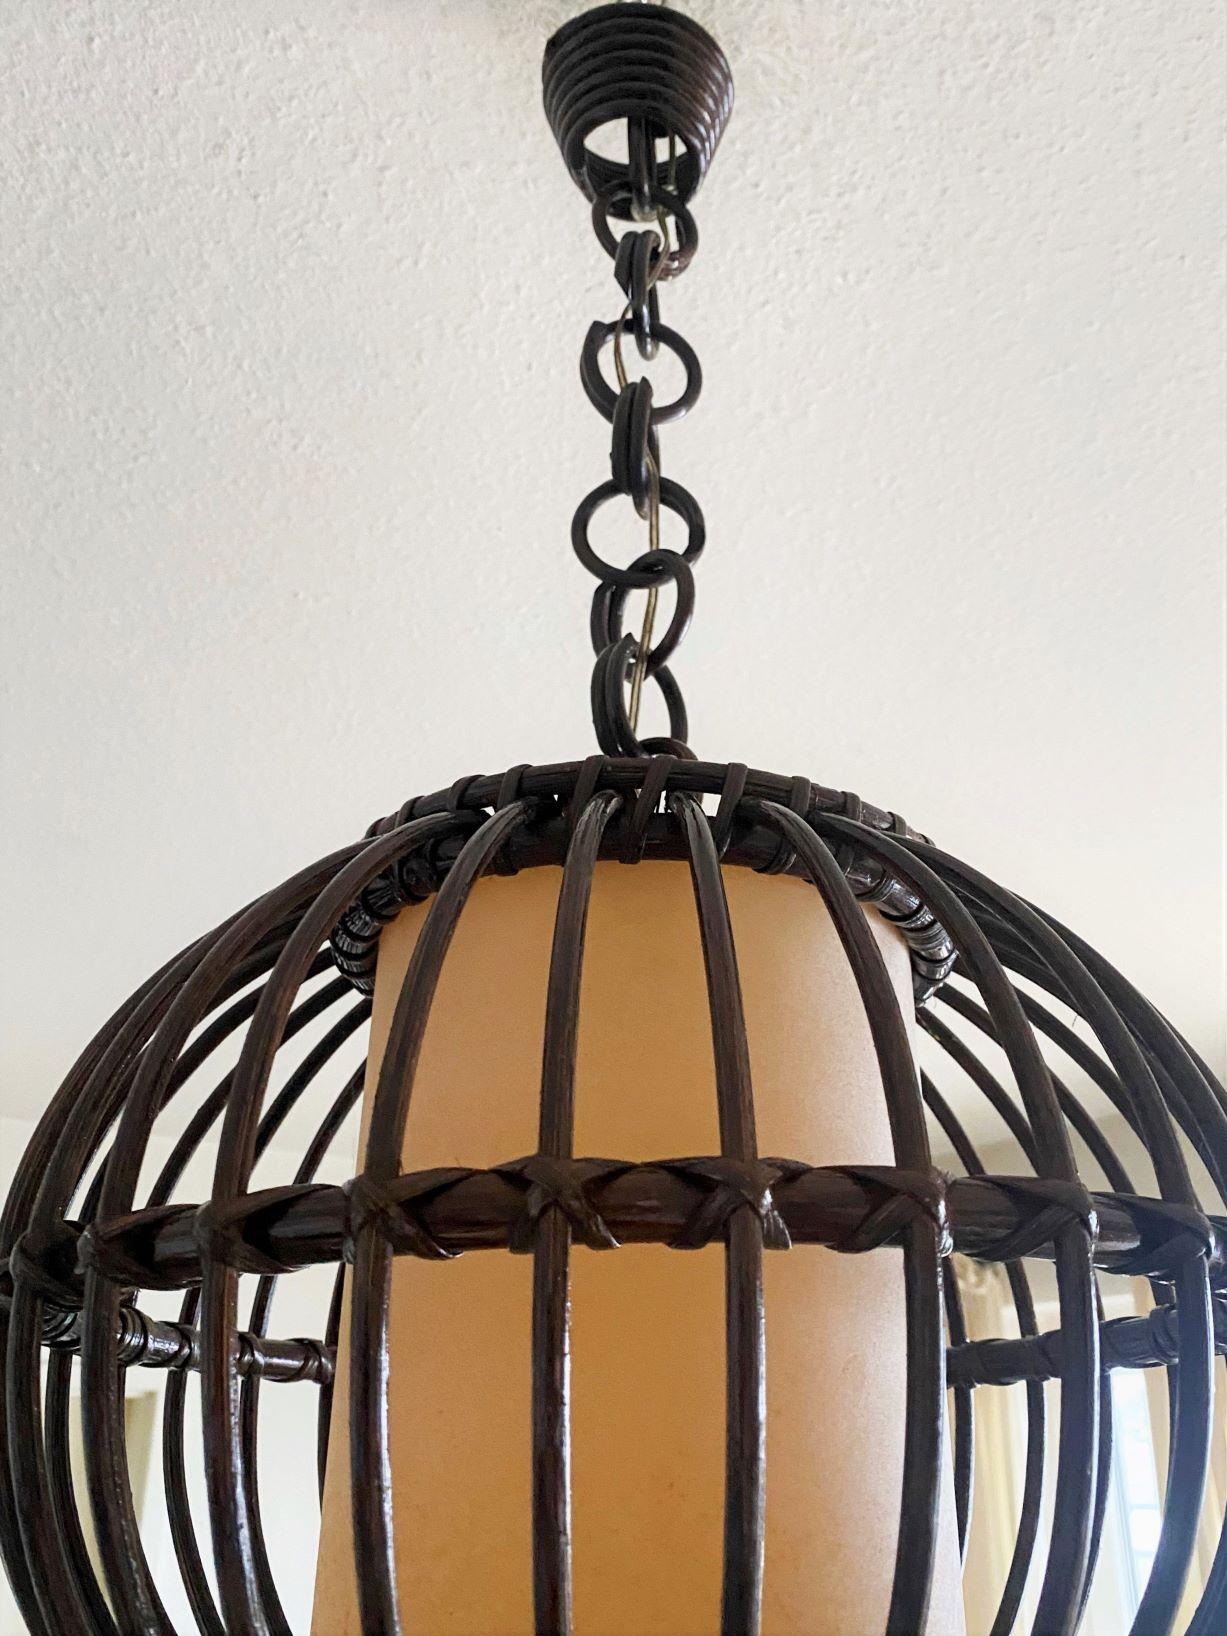 Handcrafted Rattan Wicker Globe Pendant with Perchament Lamp Shade, Spain, 1950s For Sale 1